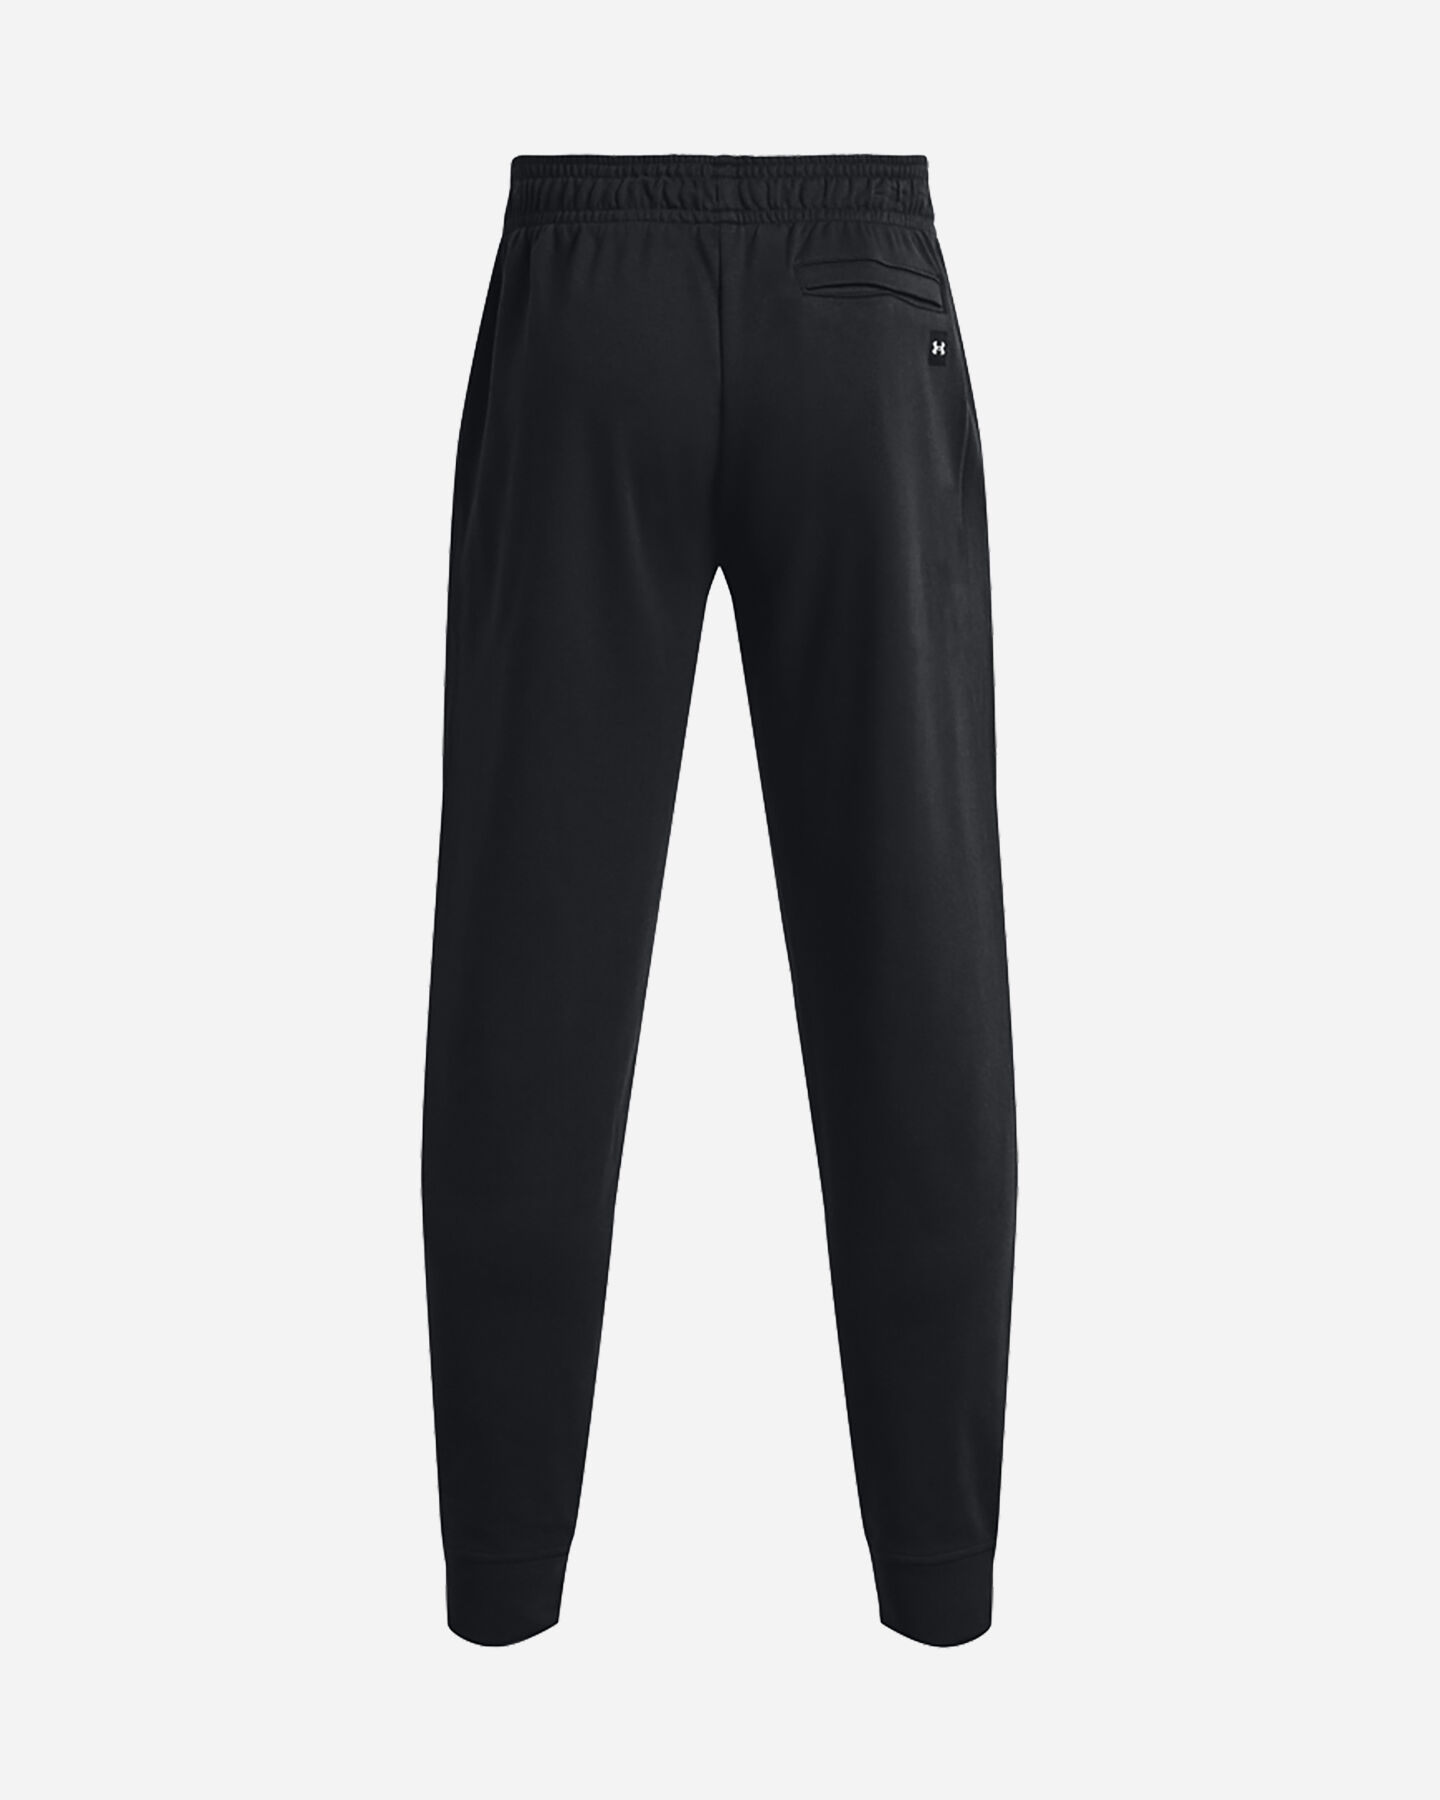  Pantalone UNDER ARMOUR THE ROCK M S5528885|0001|XS scatto 1